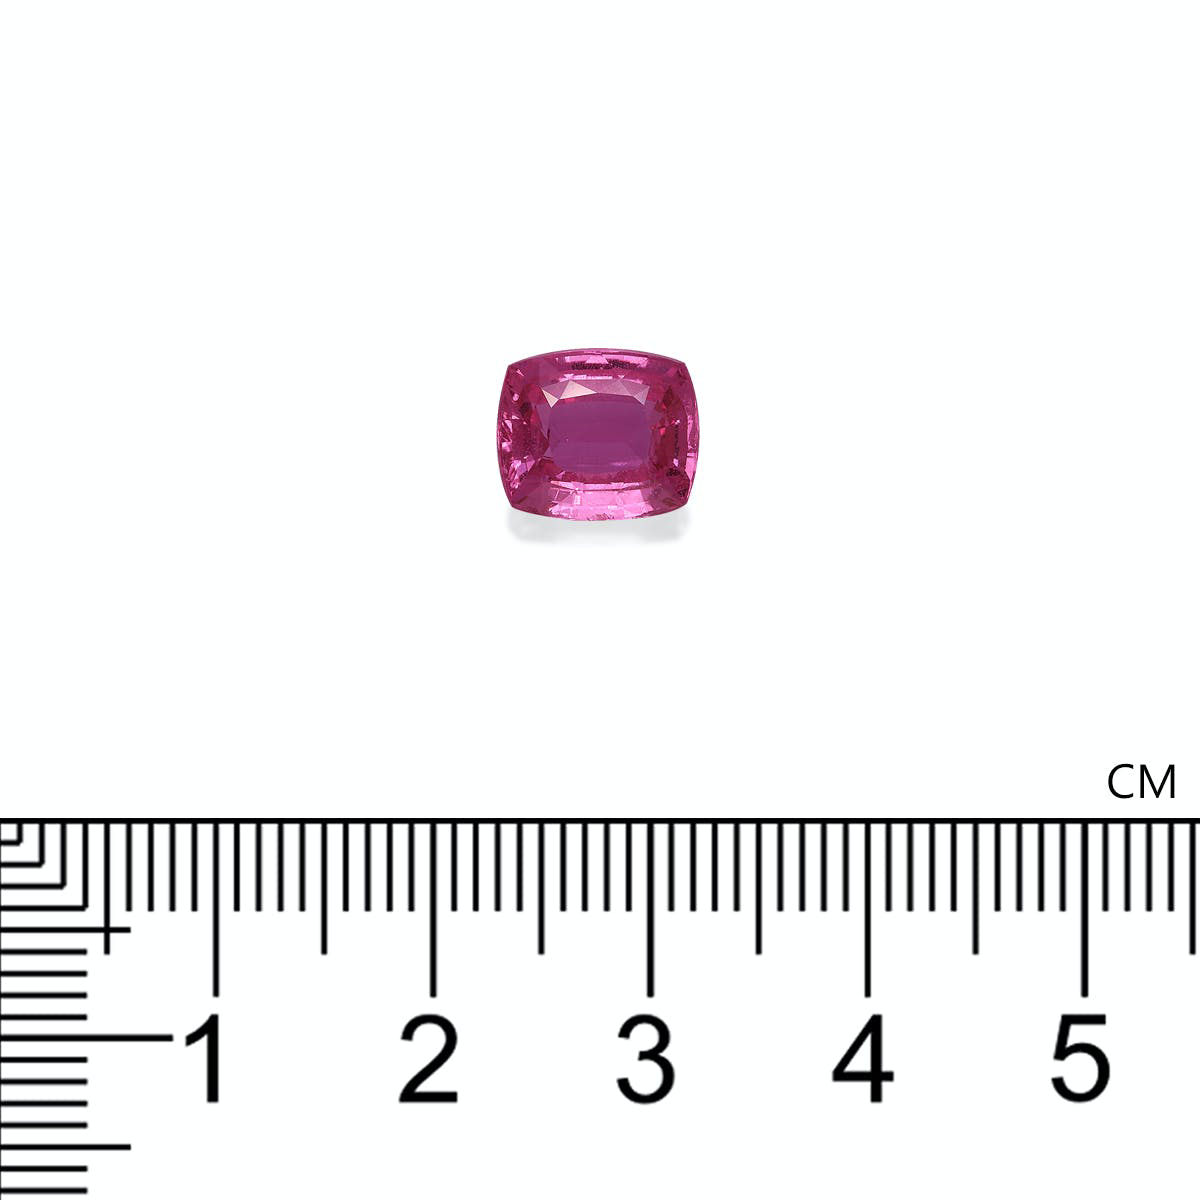 Picture of Neon Sapphire Unheated Madagascar 3.47ct (PS0019)